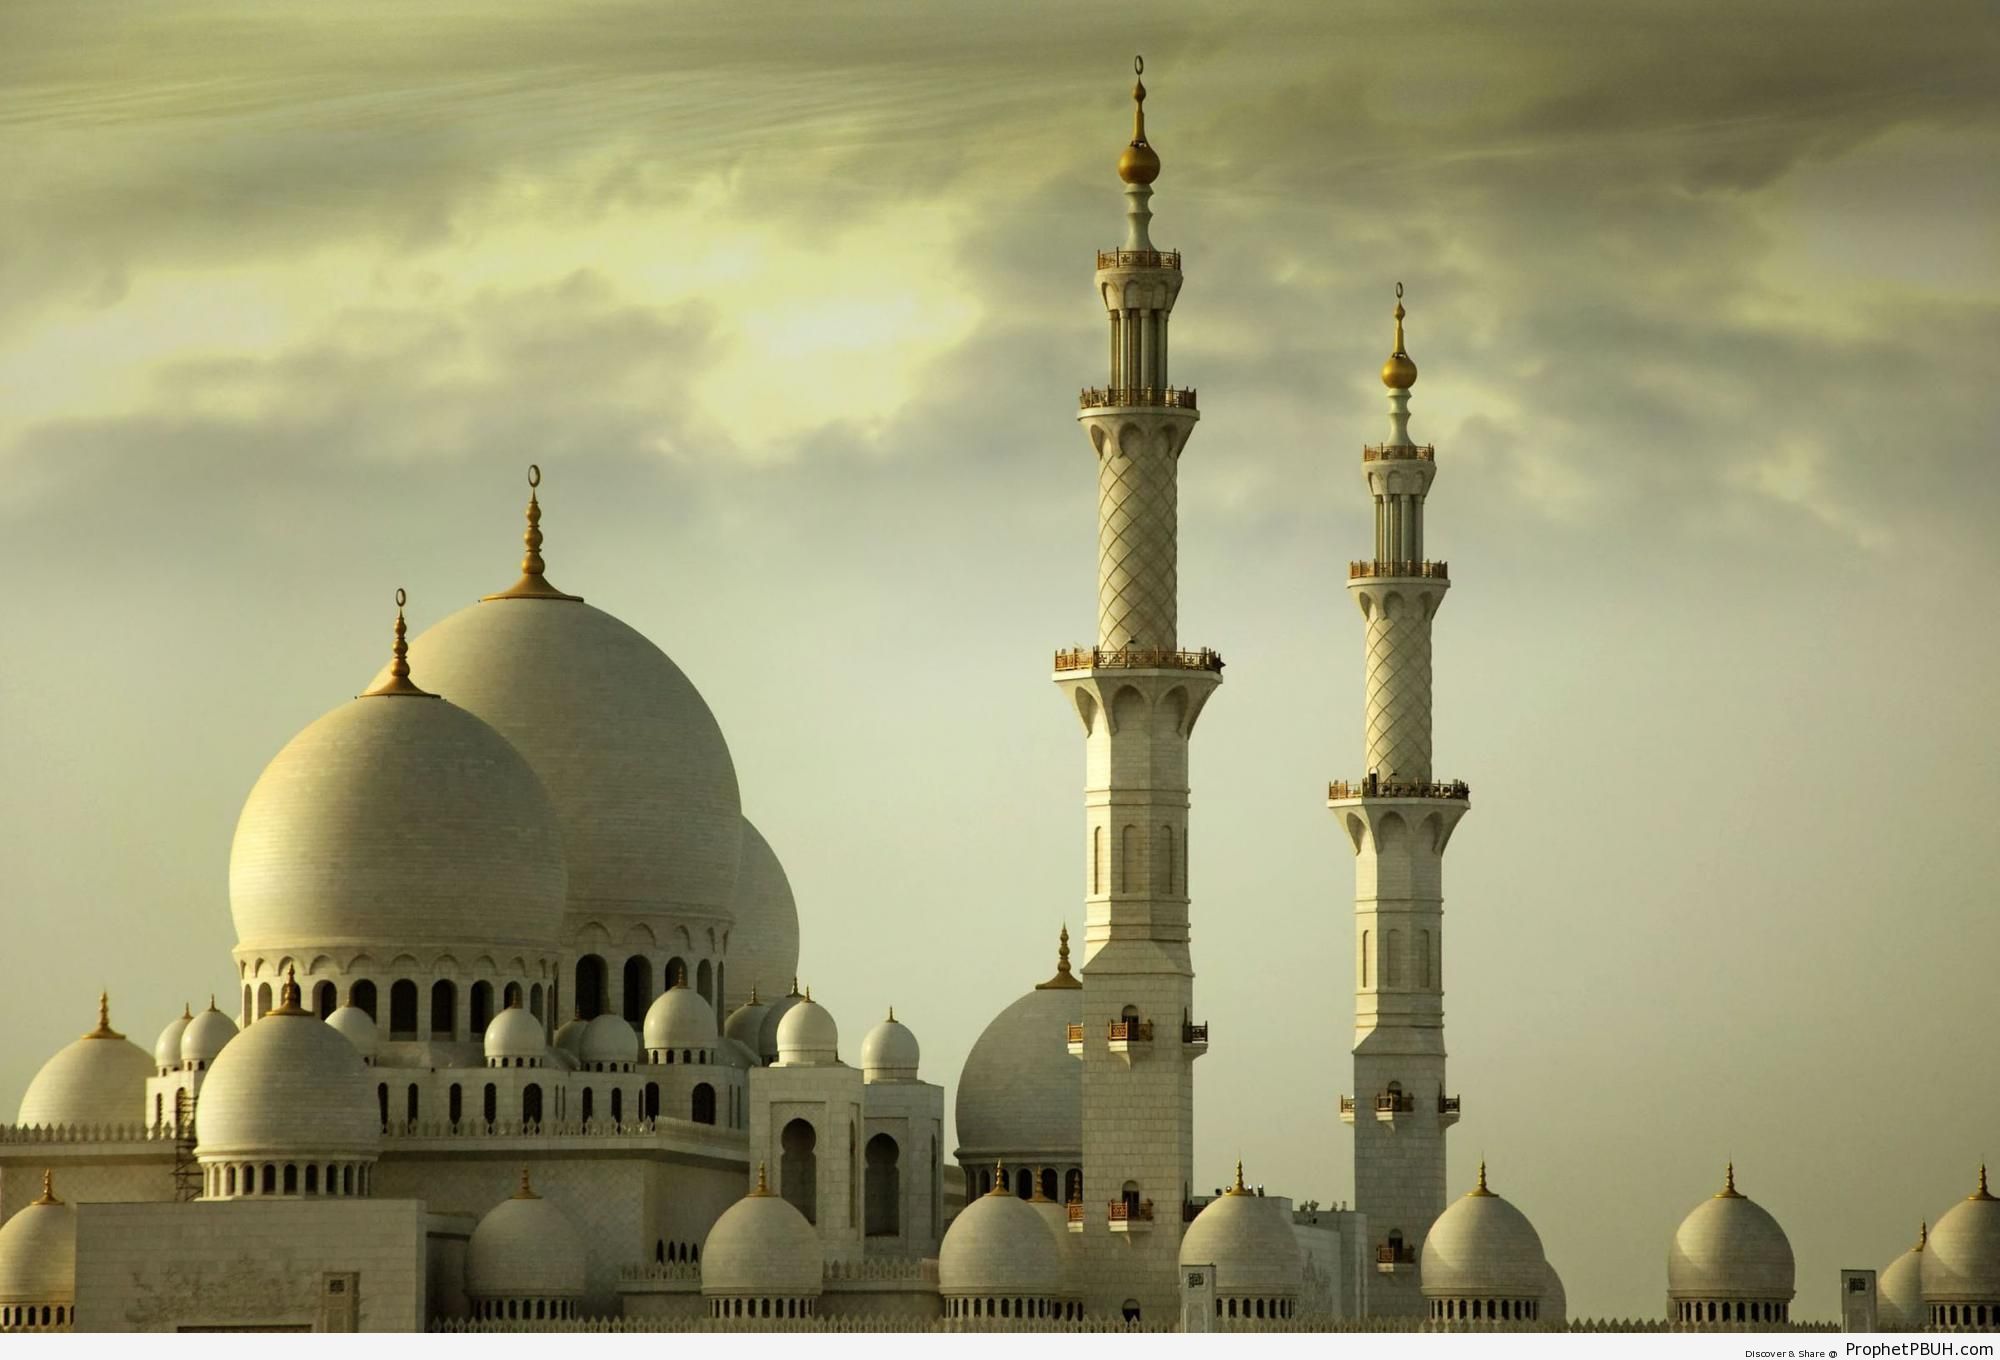 Side View of Sheikh Zayed Grand Mosque in Abu Dhabi, United Arab Emirates - Abu Dhabi, United Arab Emirates -Picture